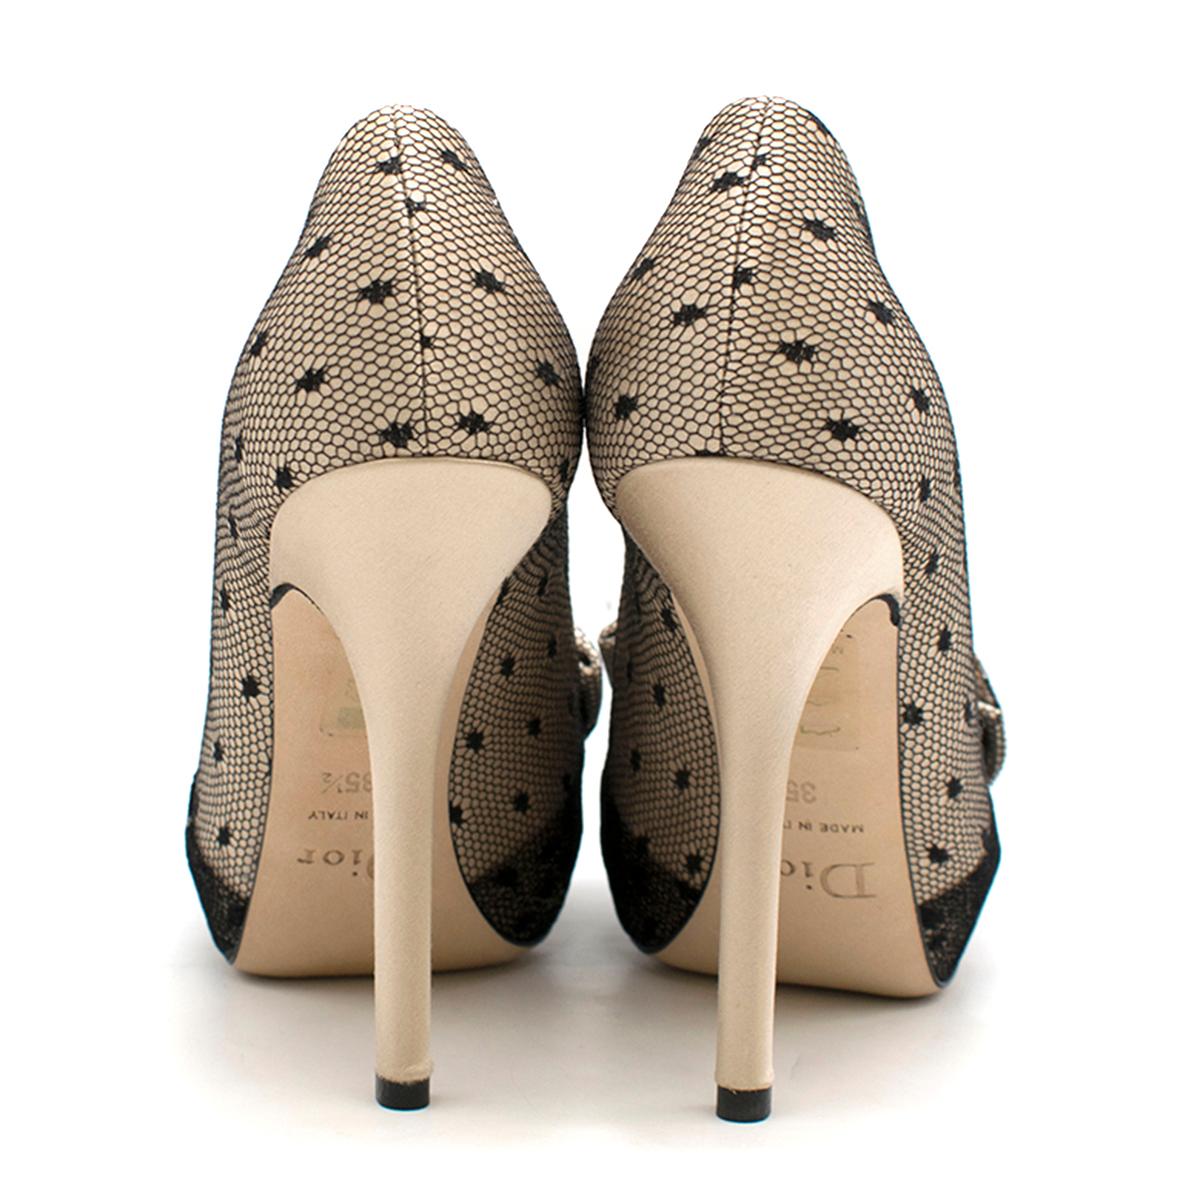 Dior Nude Silk Lace Embellished Pumps 

- Nude silk pumps embellished with black lace
- Open toe
- Hidden platform
- Decorative bow
- Stiletto hill
- Nude leather sole and insole

This item comes with the original dust bag

Please note, these items